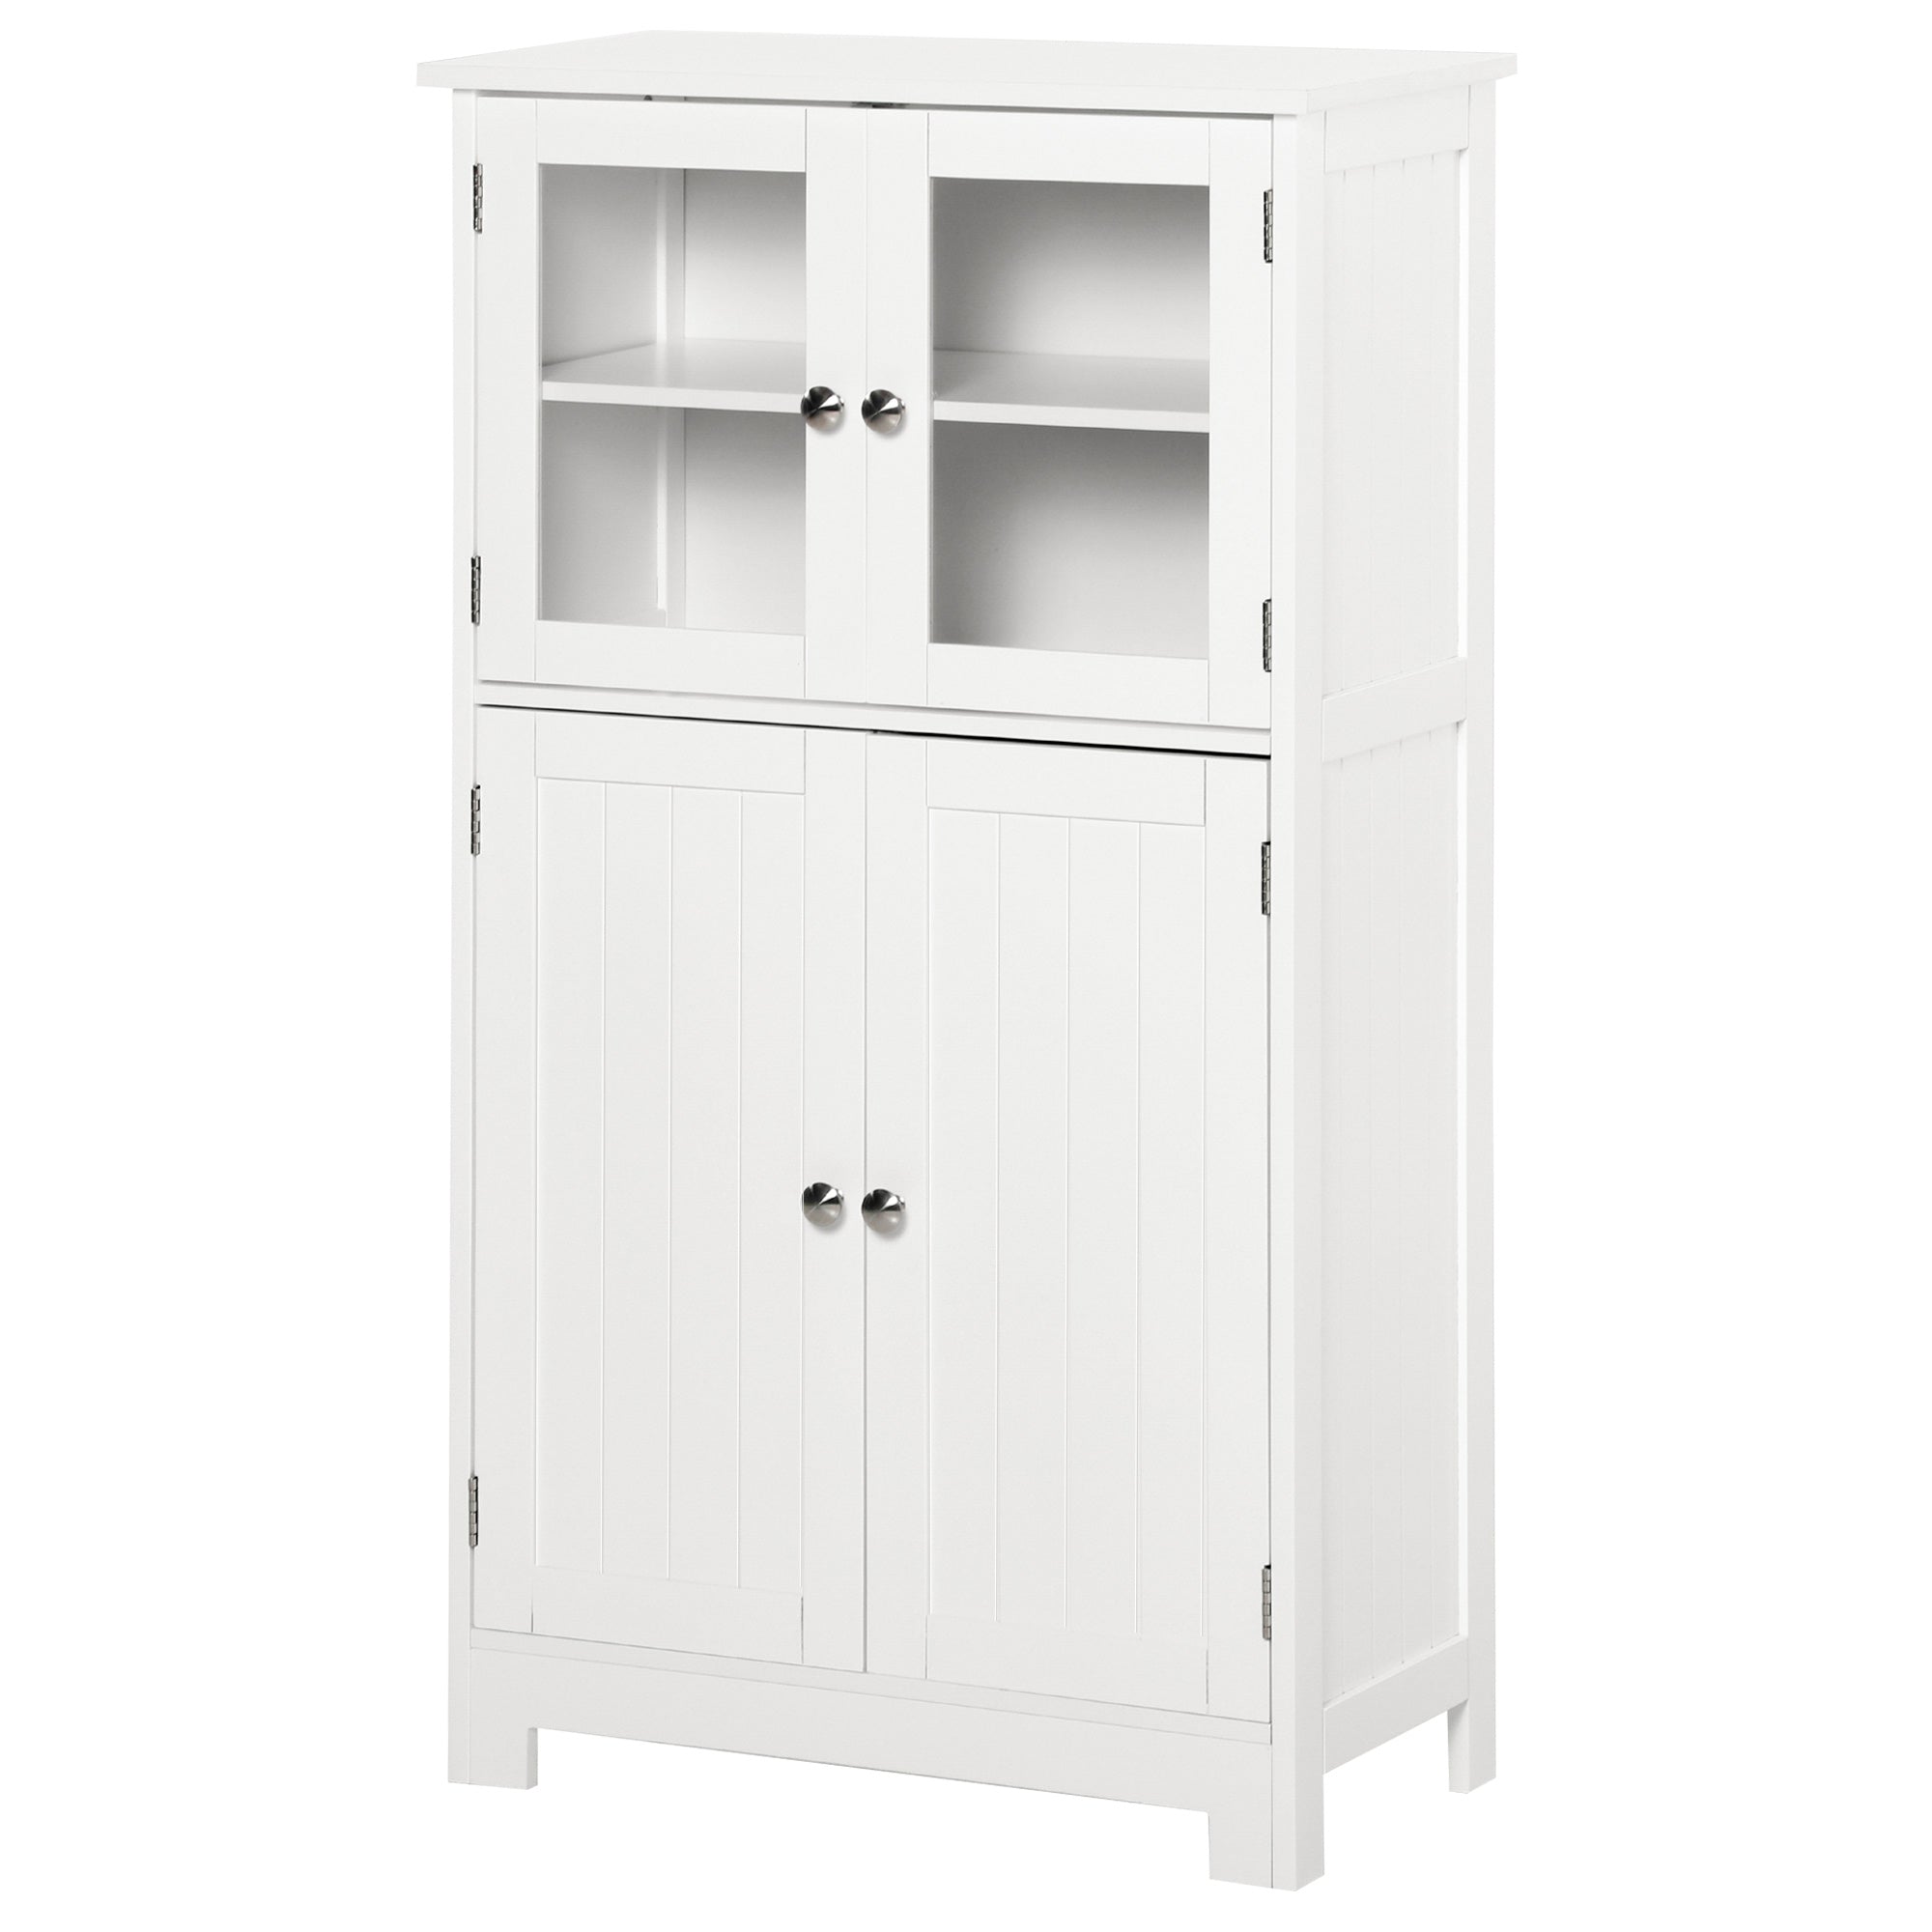 Bathroom Floor Storage Cabinet with Tempered Glass Doors and Adjustable Shelf, Free Standing Organizer for Living Room Entryway, White-0